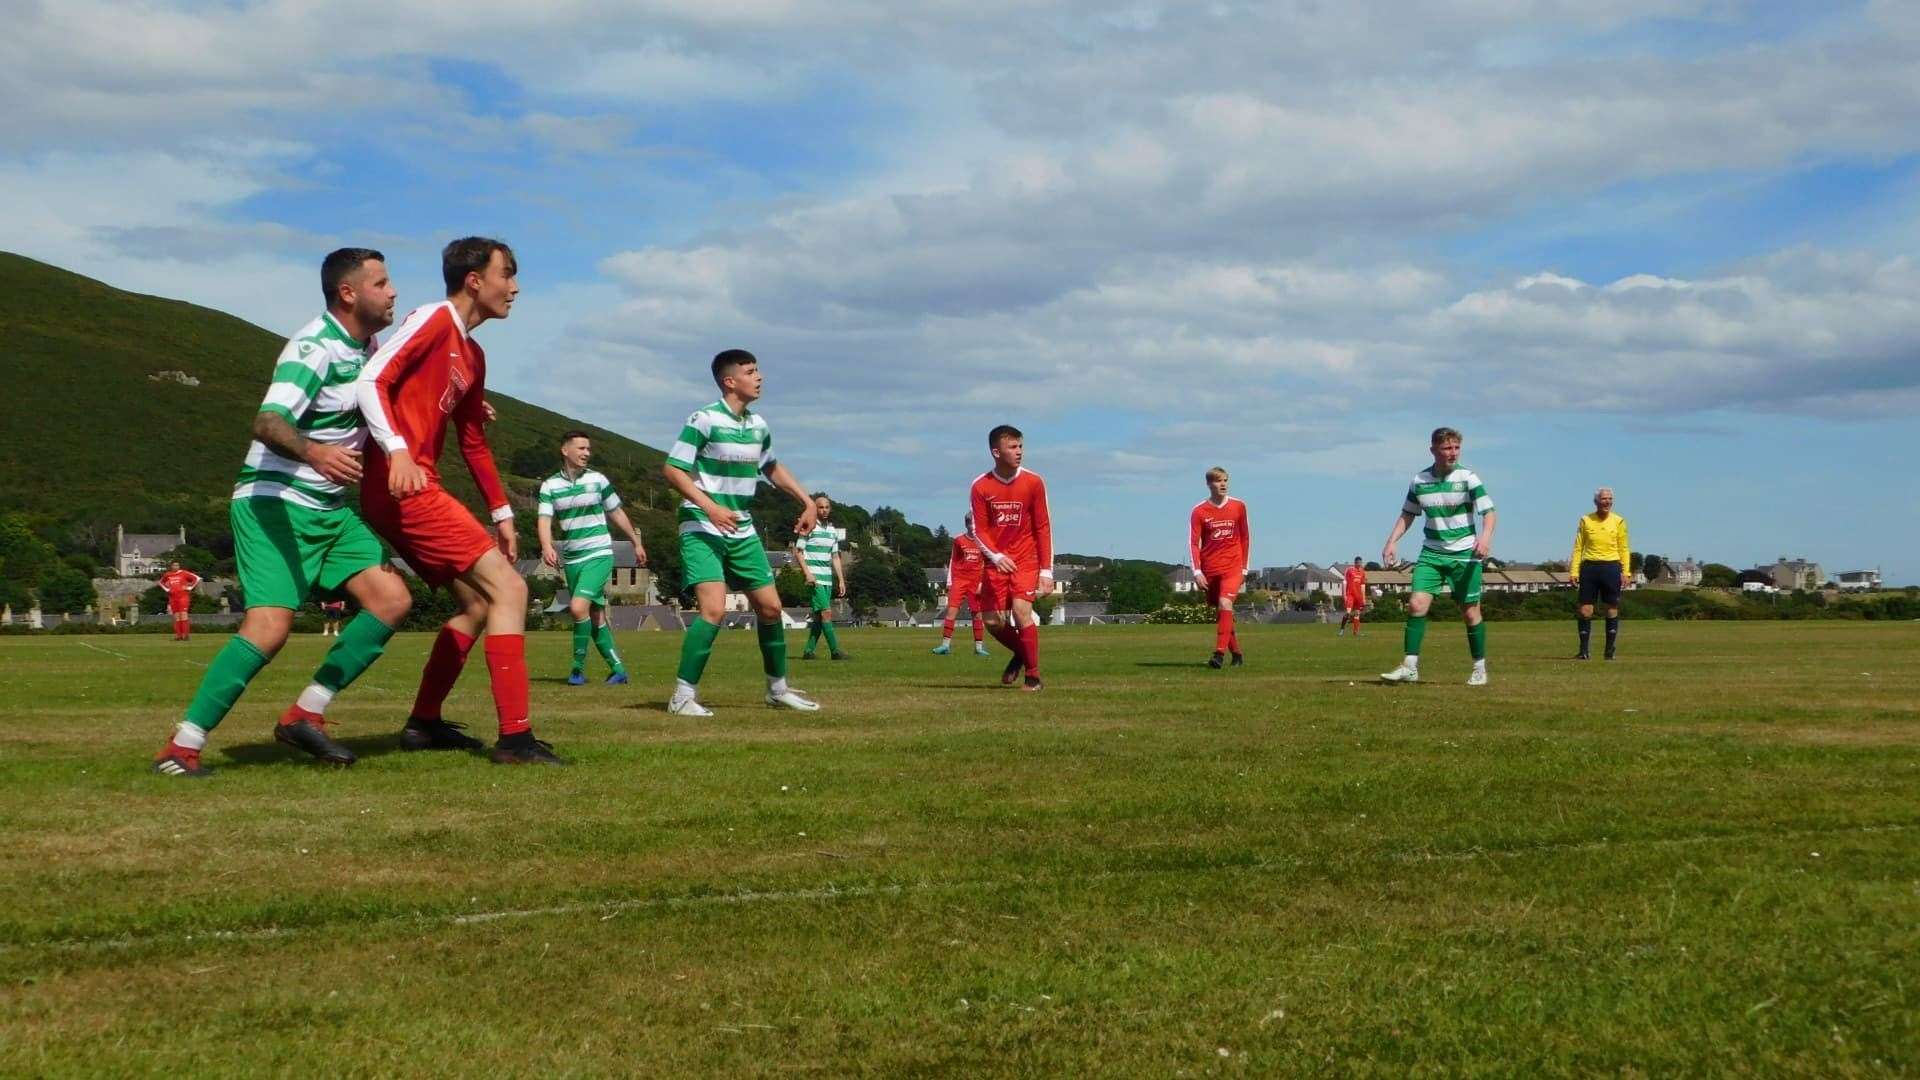 Helmsdale picked up another three points with a 10-0 win over Melvich. Photo: Justine Ainsworth